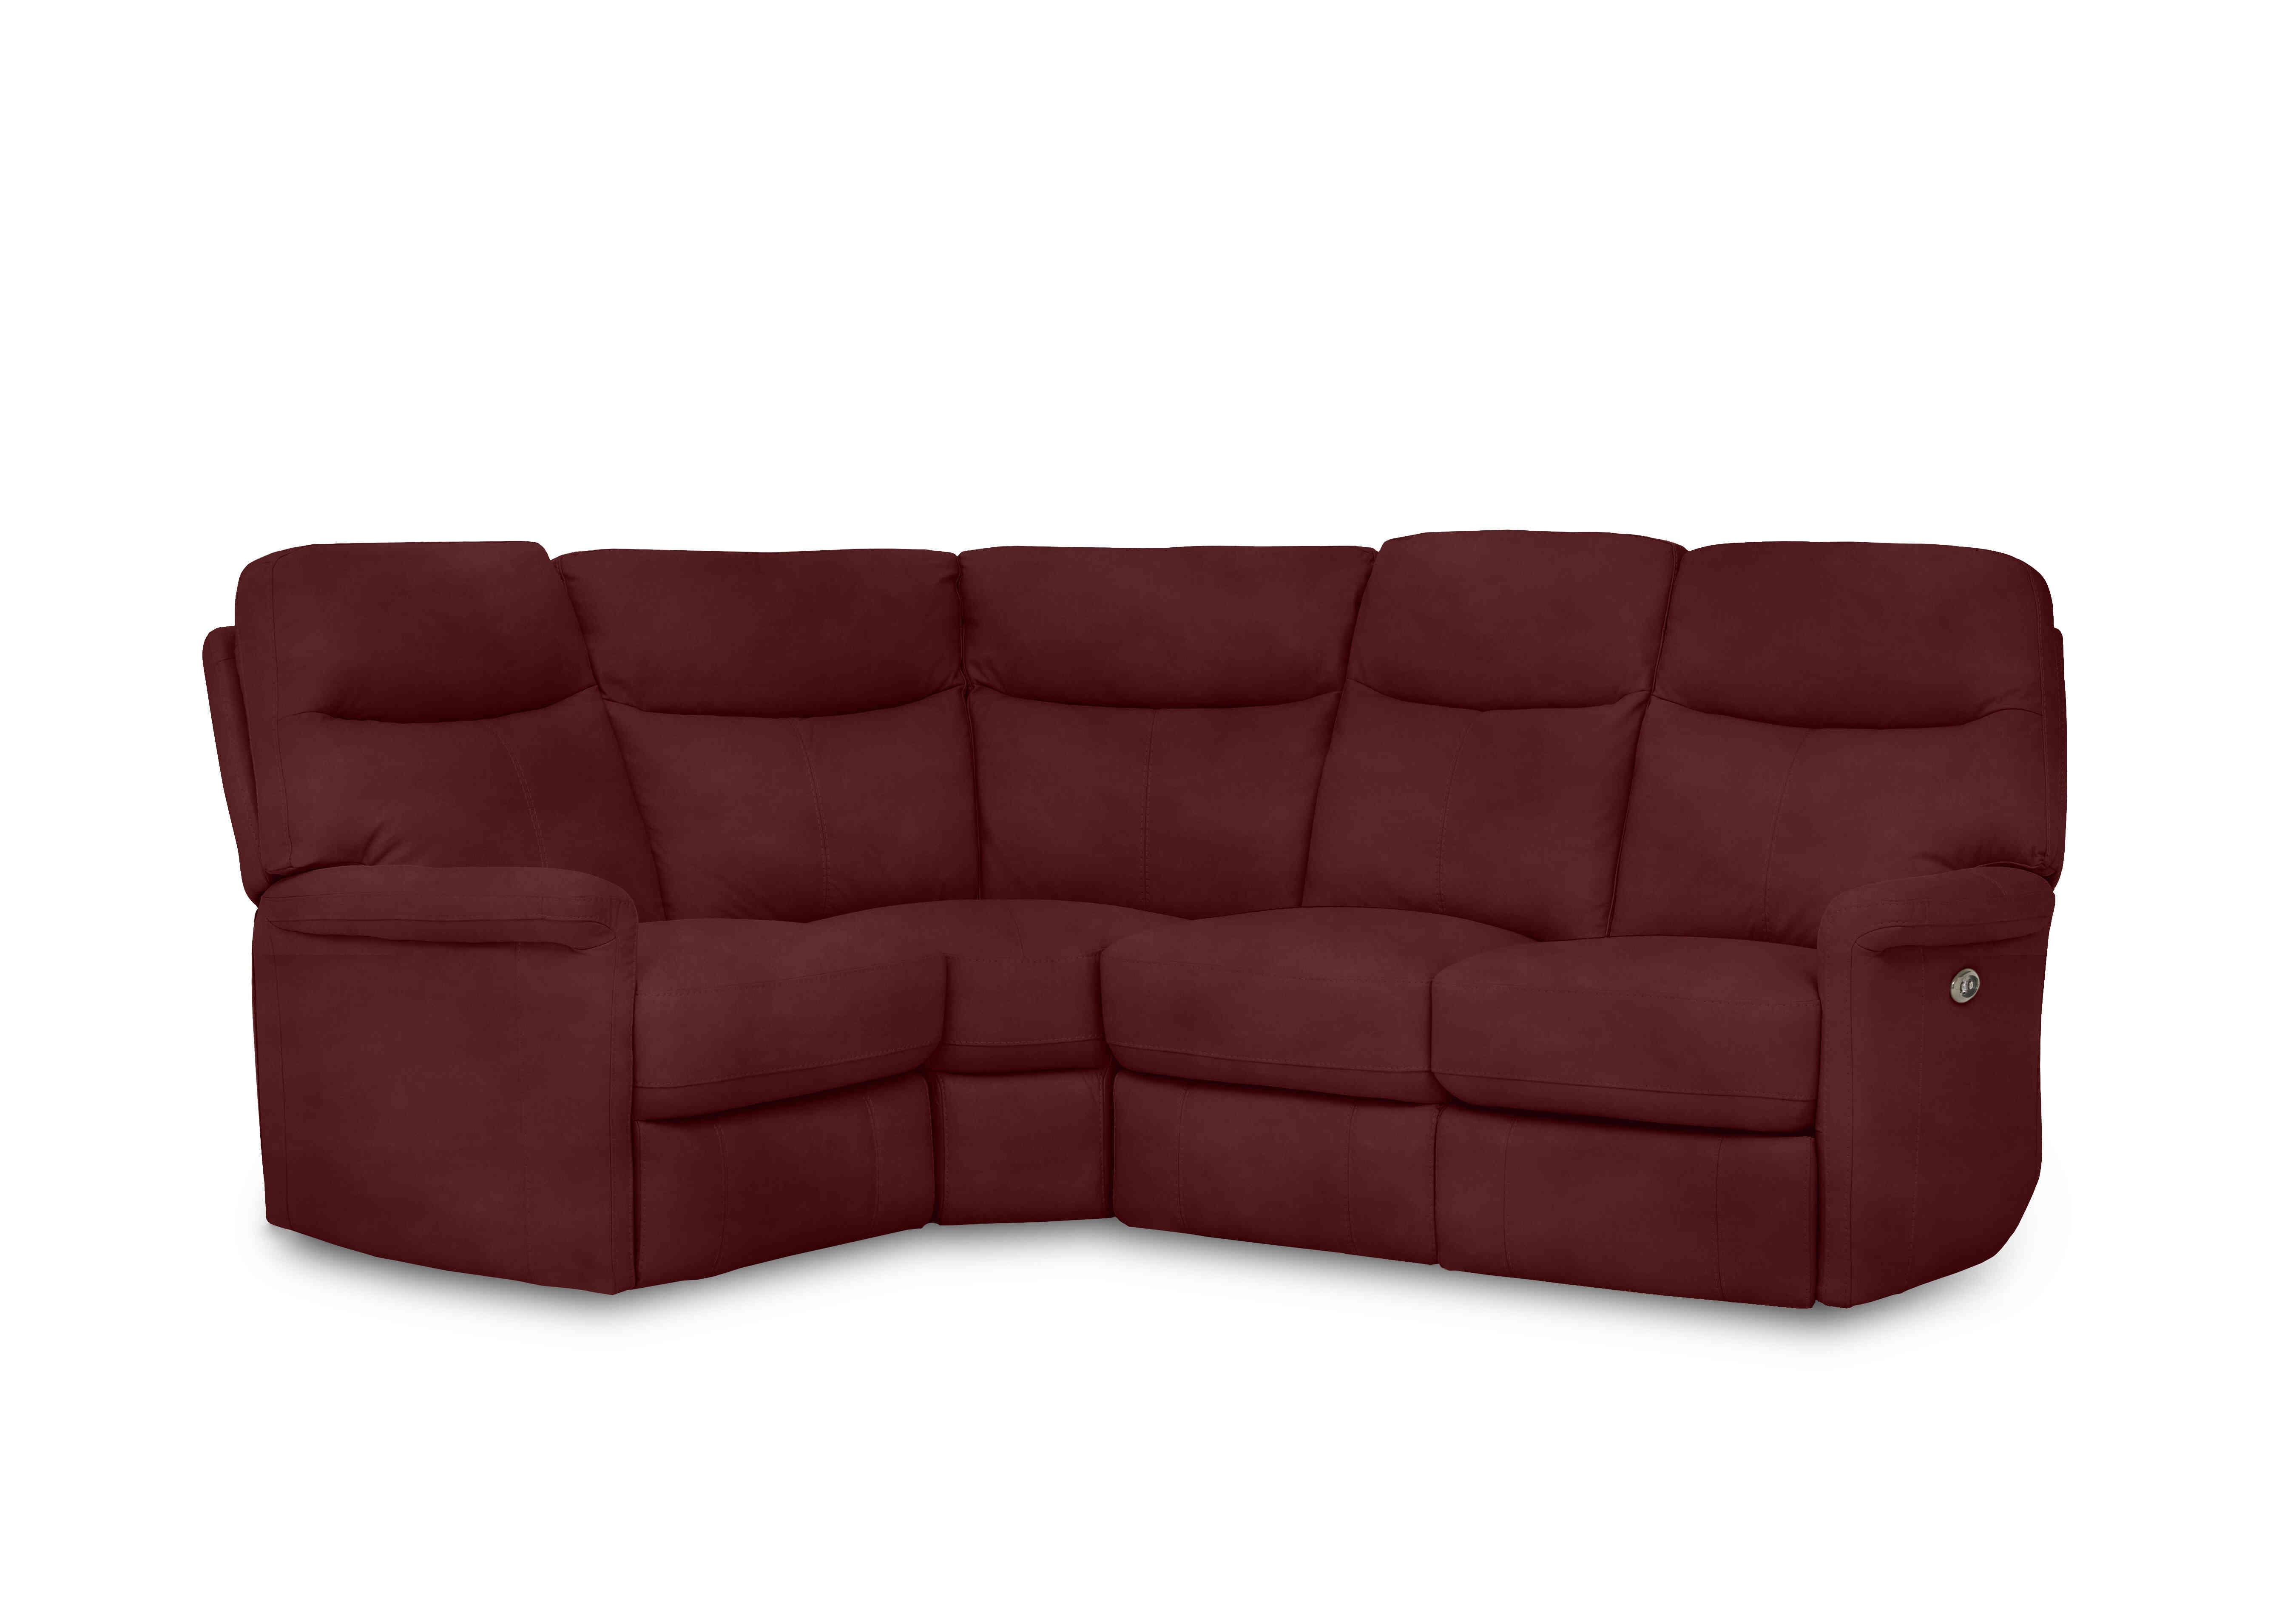 Compact Collection Lille Fabric Corner Sofa in Fab-Meg-R65 Burgundy on Furniture Village